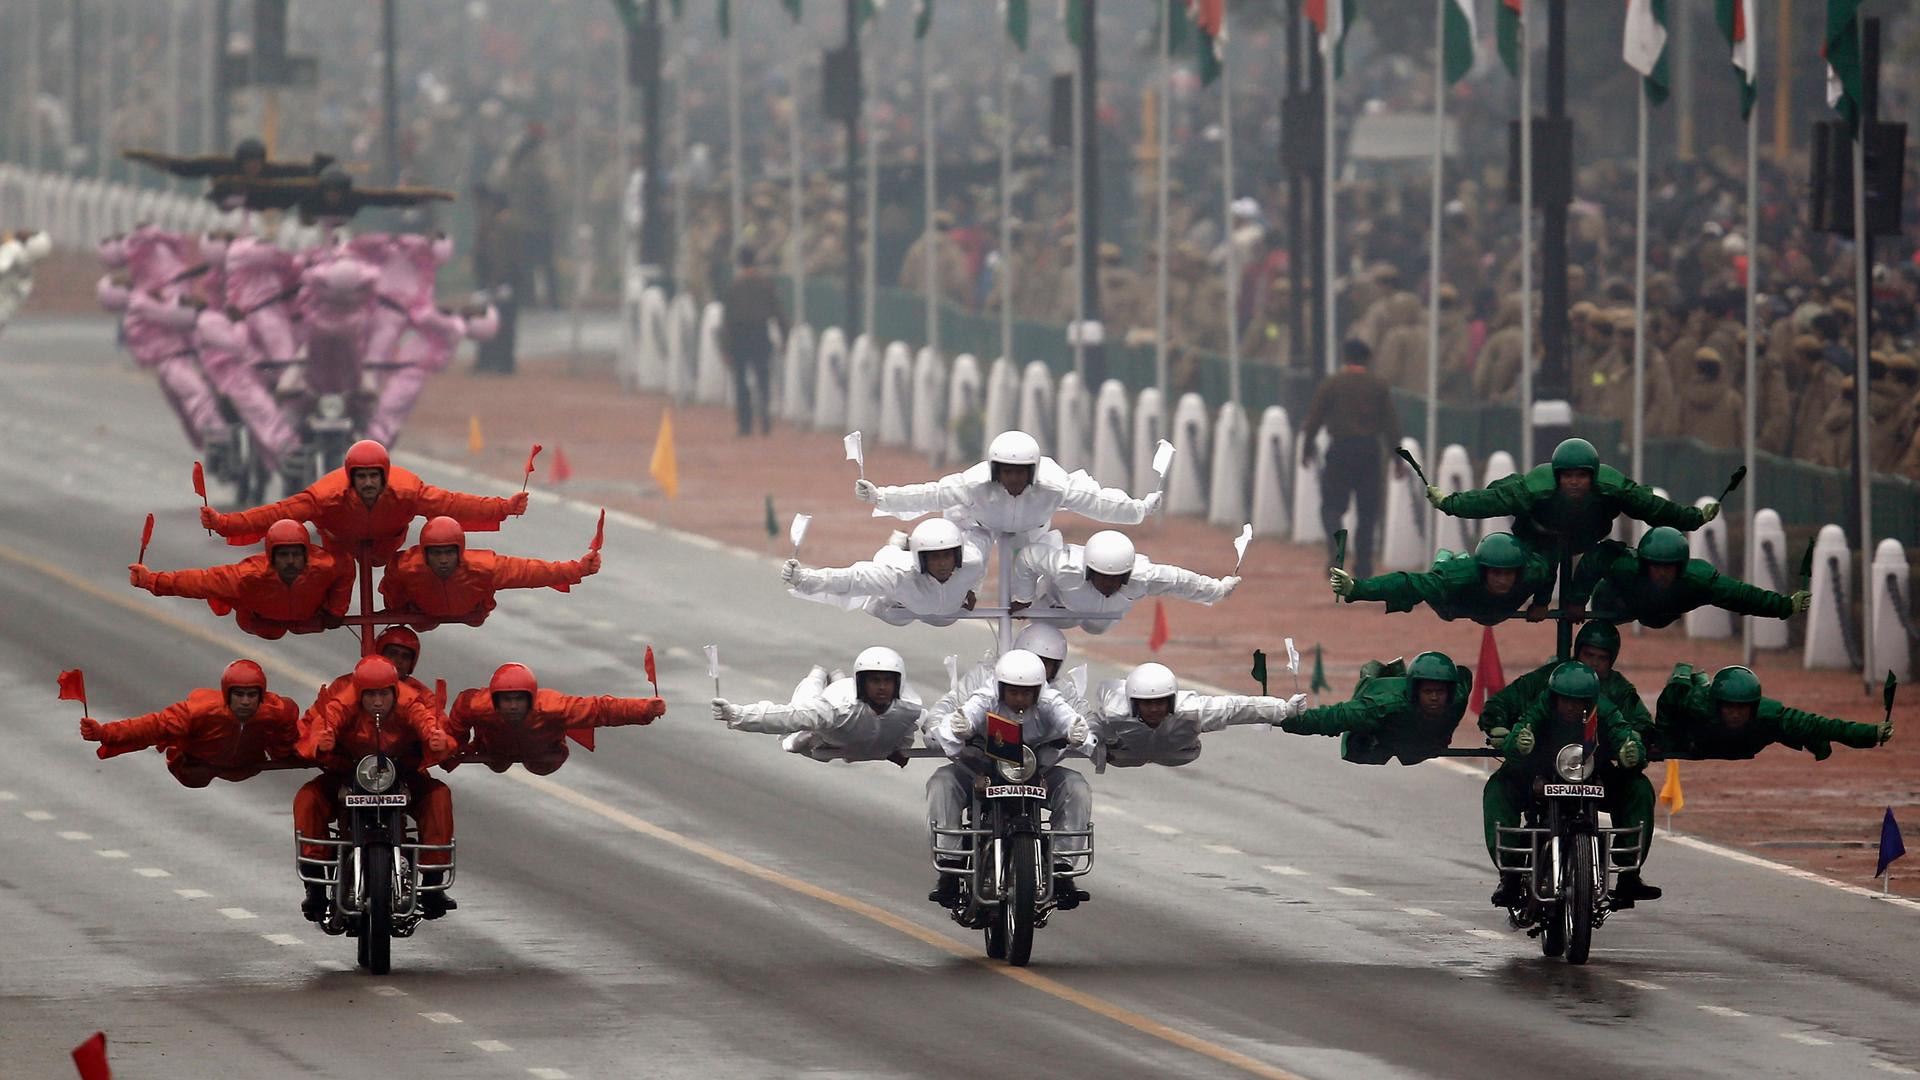 India's Border Security Force "Daredevils" motorcycle riders perform stunts as they take part during the Republic Day parade in New Delhi January 26, 2015.